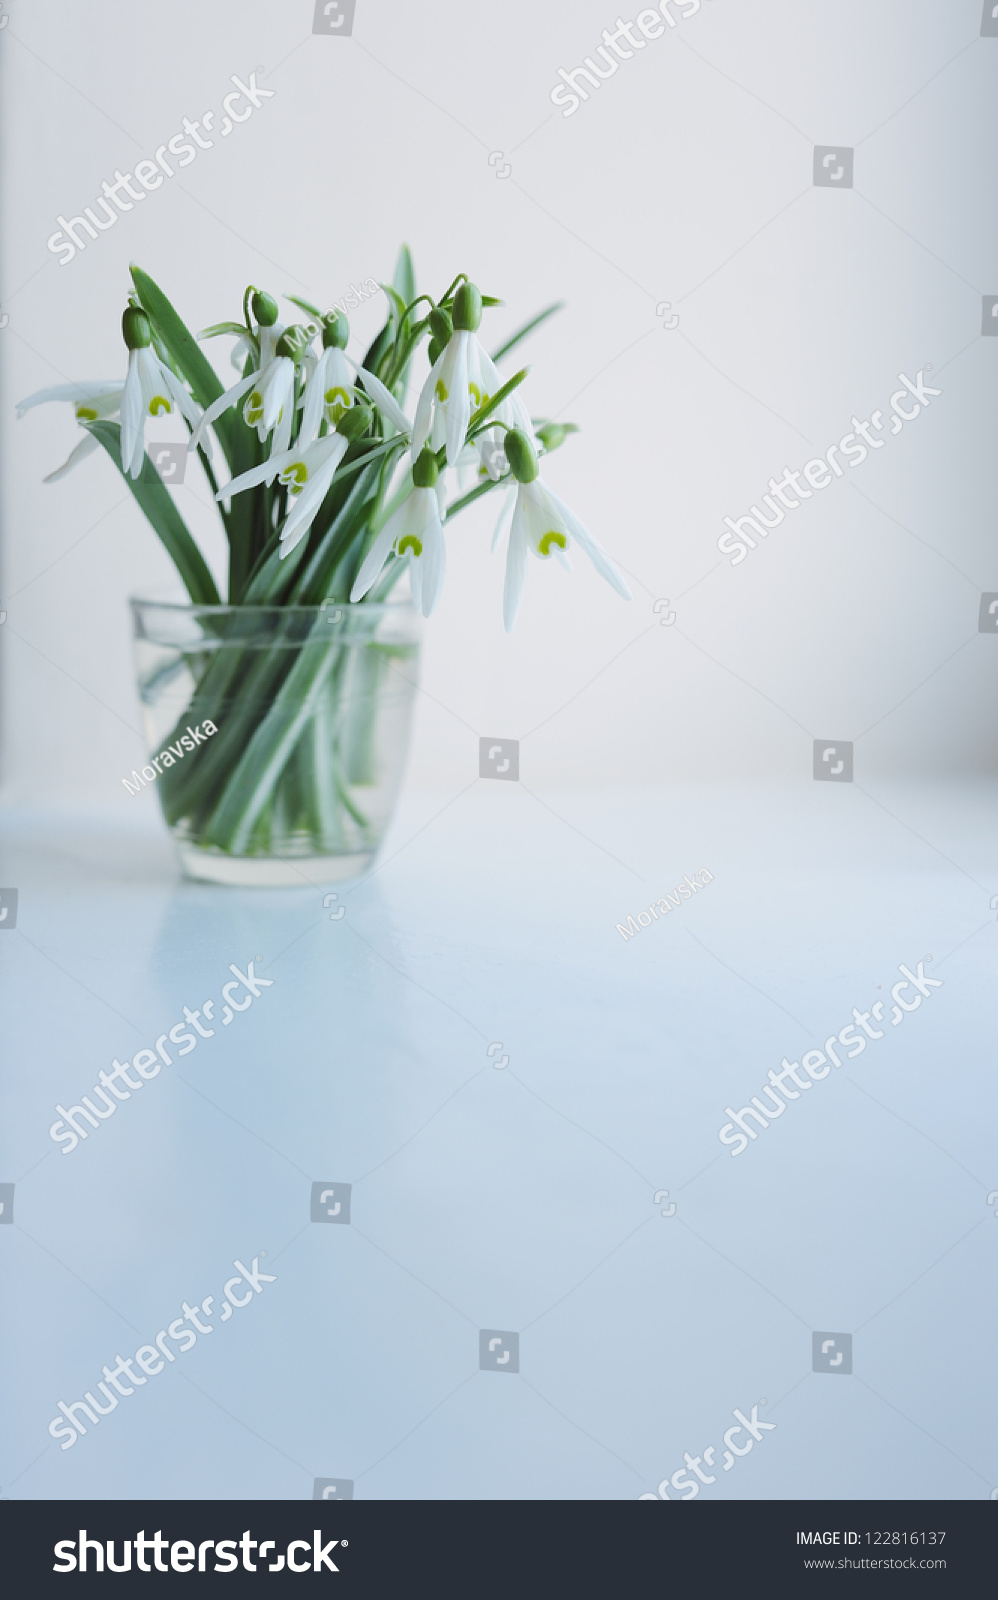 bouquet of snowdrops in a glass #122816137